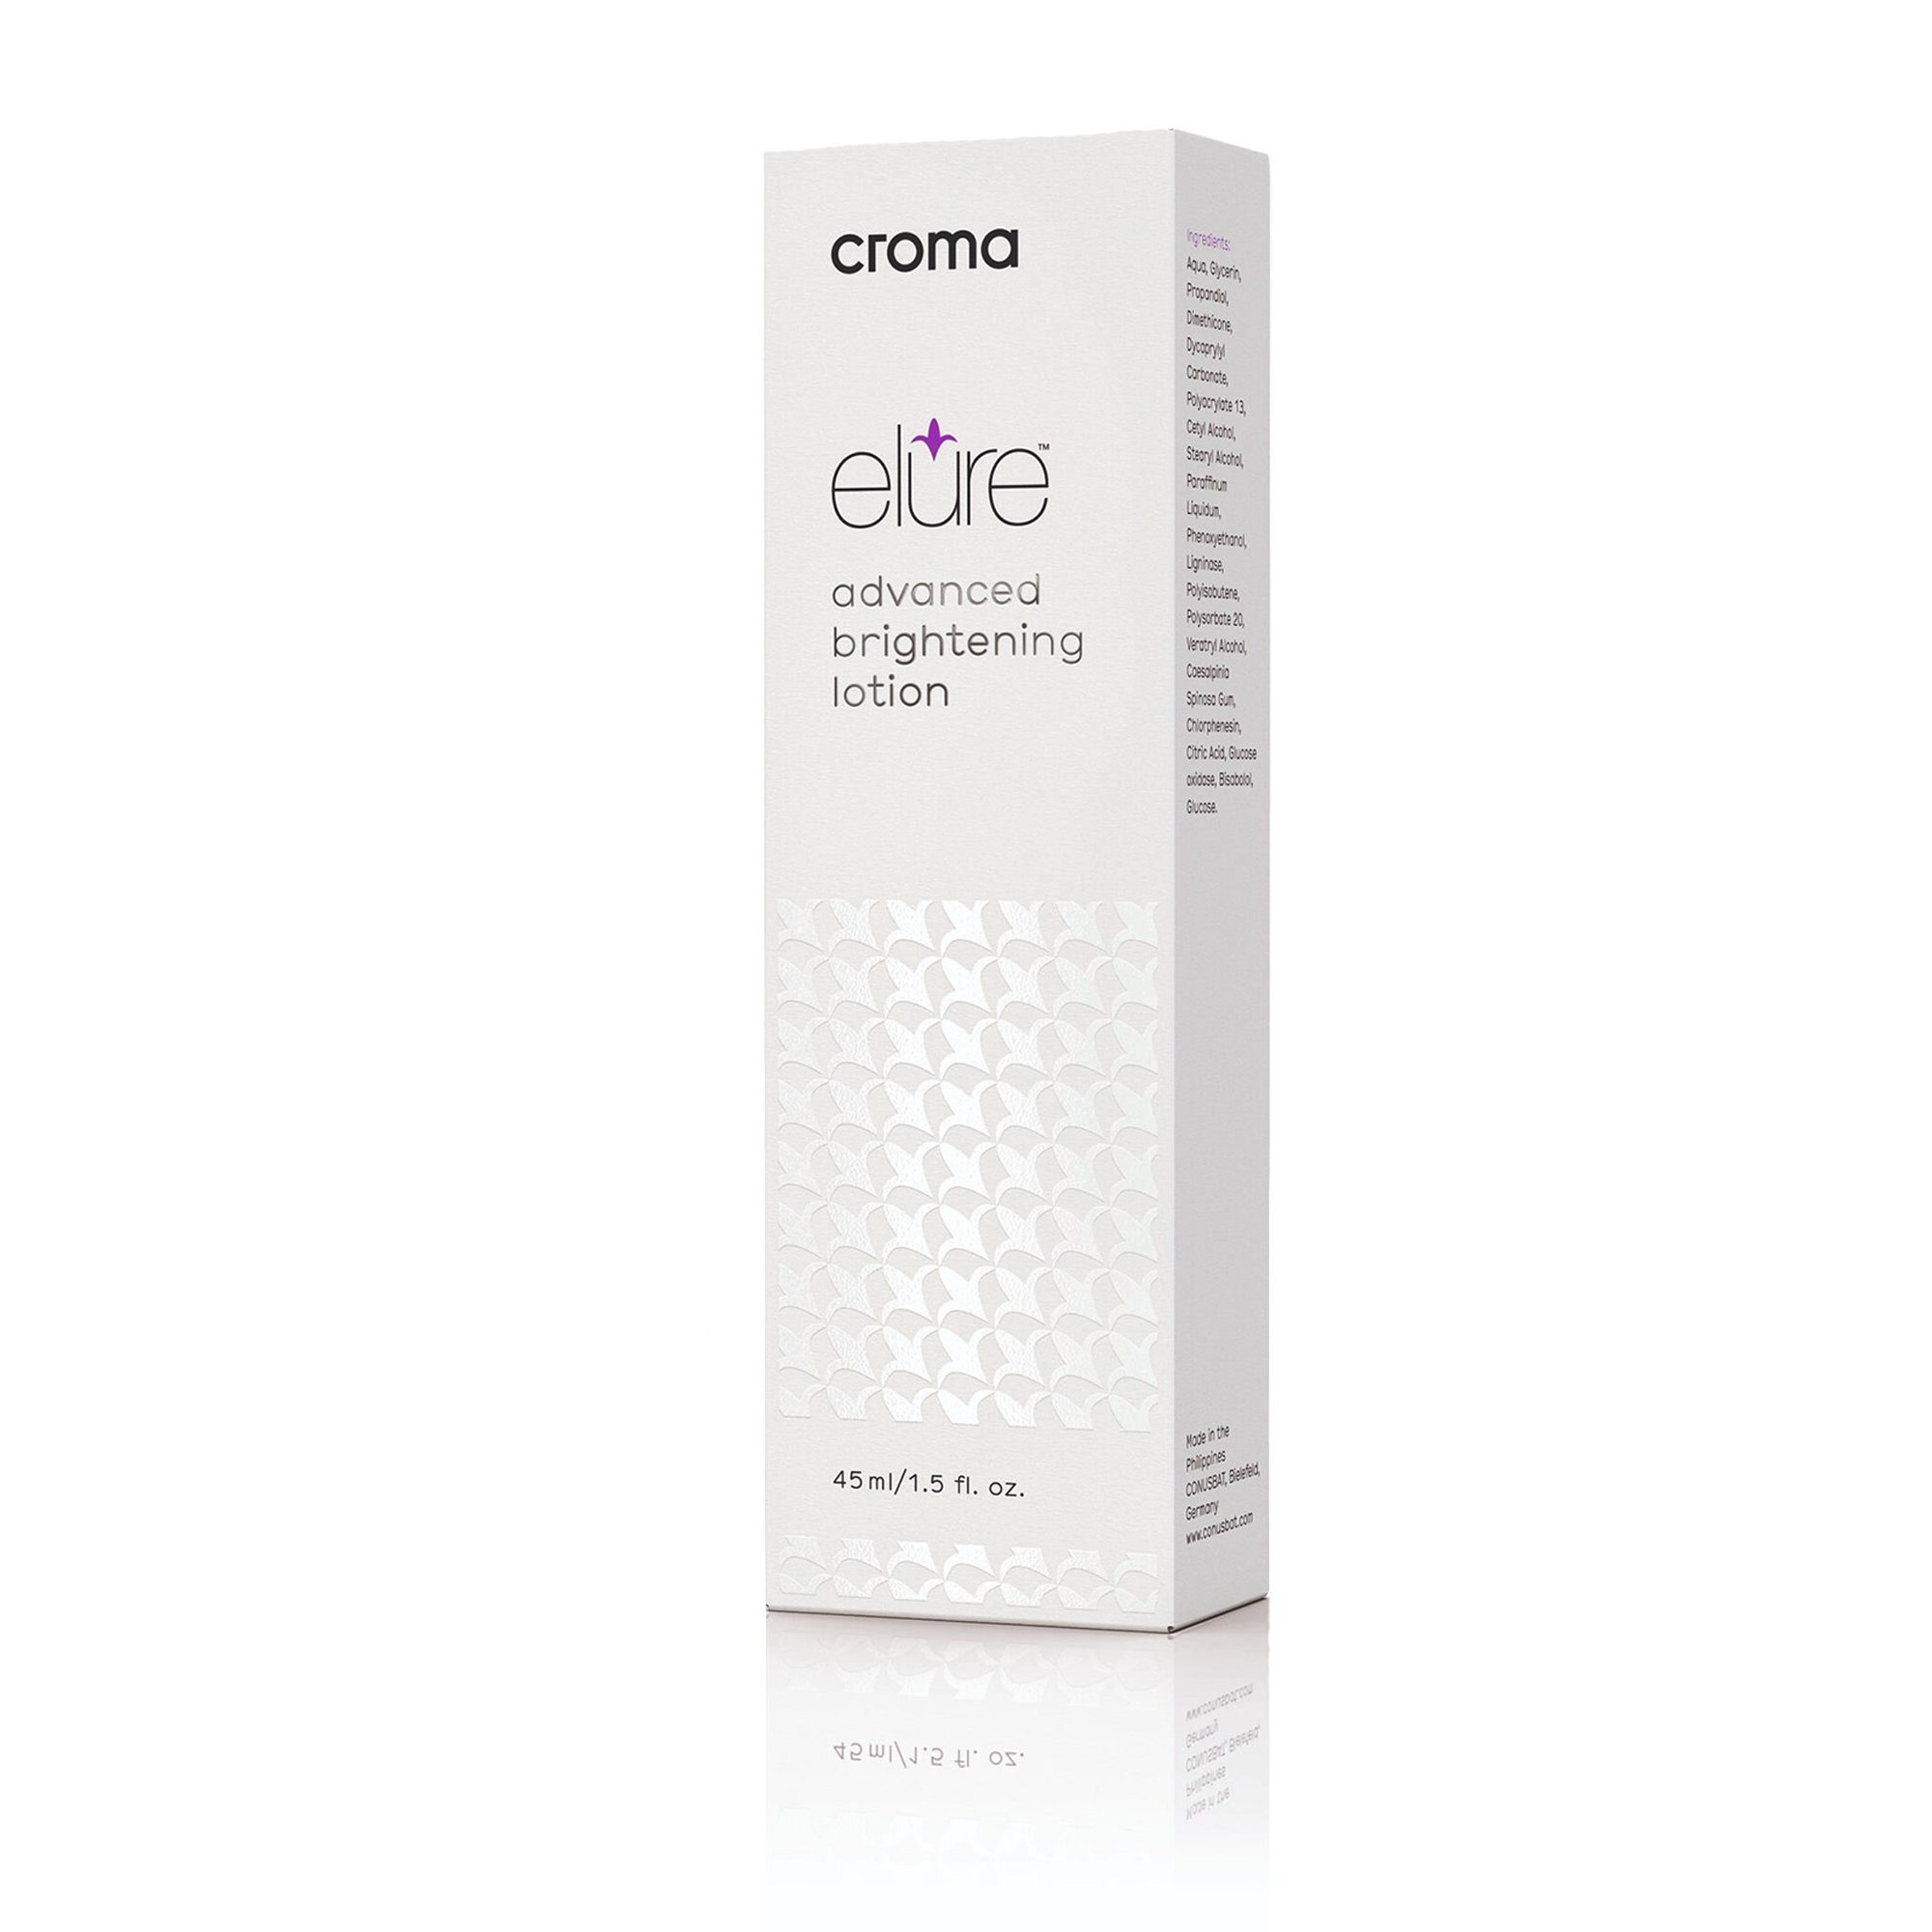 Croma Gesichtslotion Lotion Packung, Croma 1-tlg. Brightening Advanced Elure